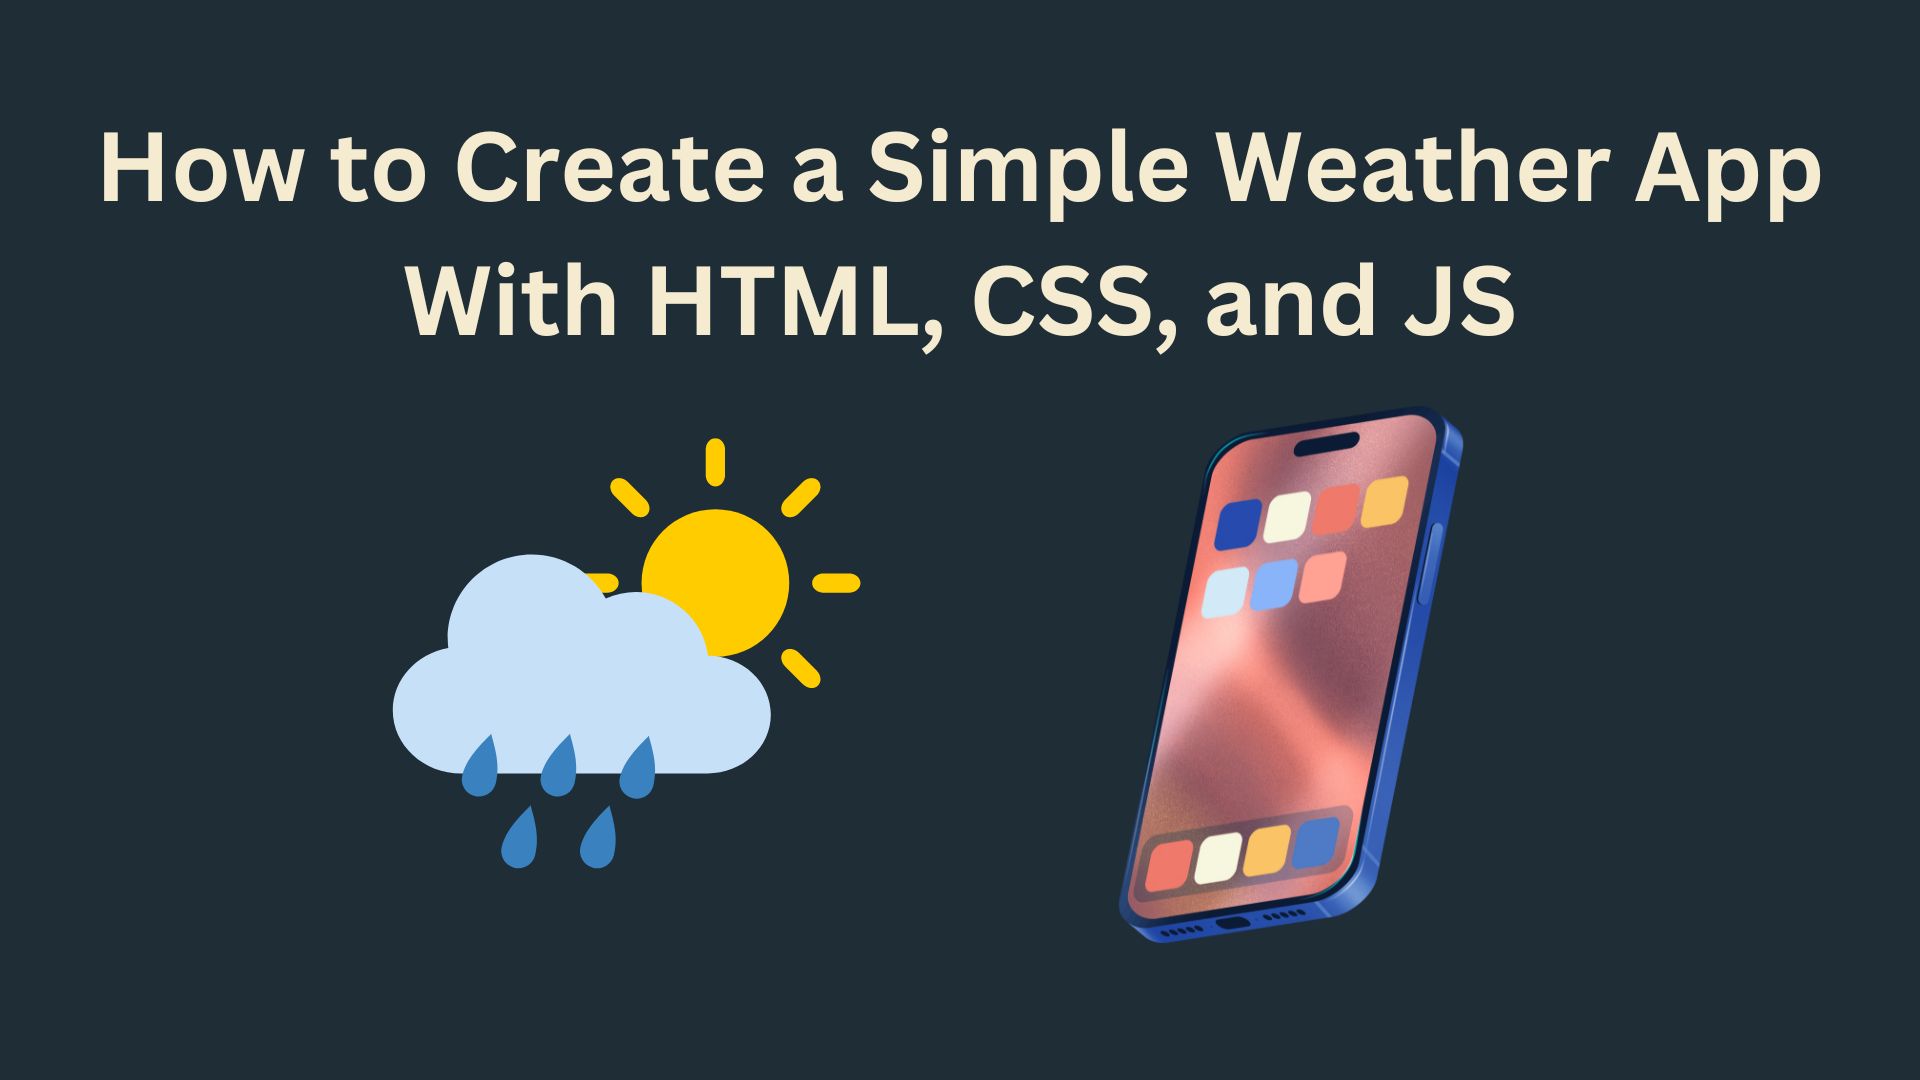 How to Create a Simple Weather App With HTML, CSS, and JS